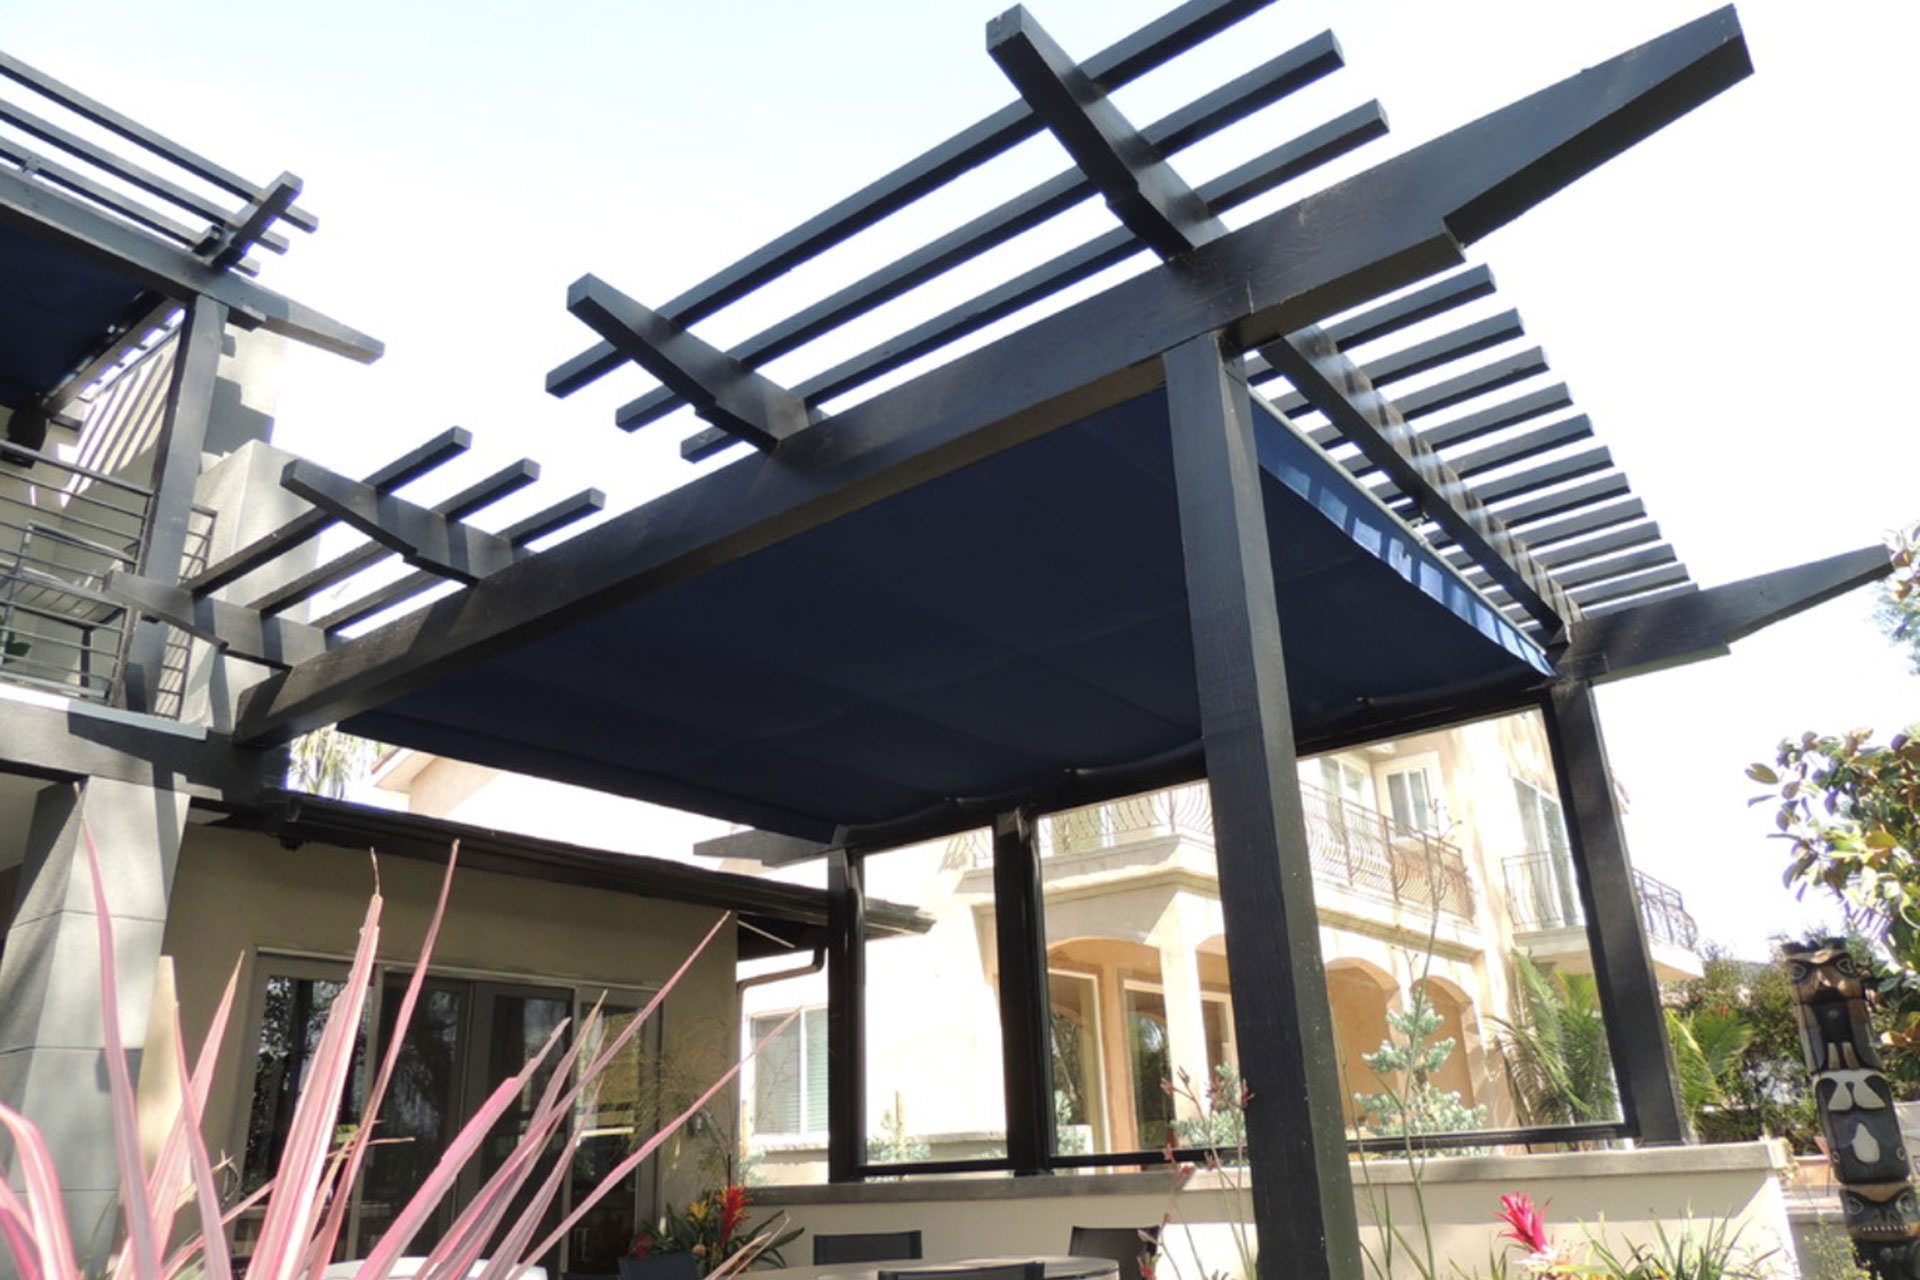 Pergolas or Patio Covers: How to Choose The Right Shade ...